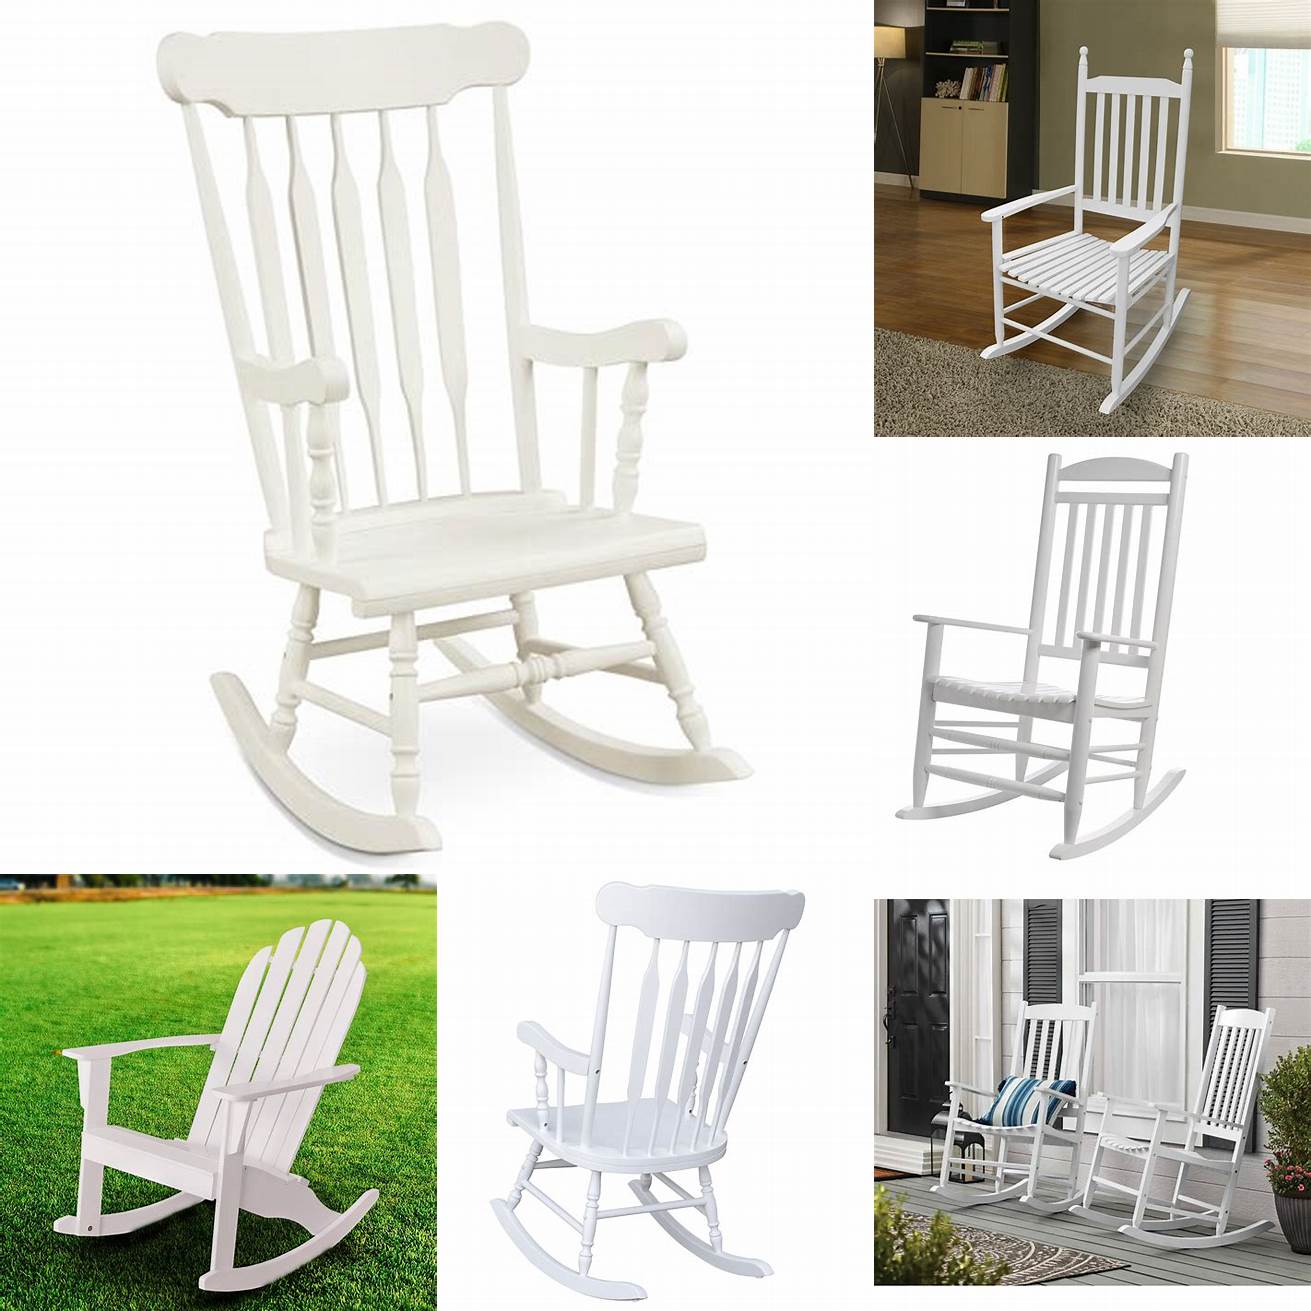 A white rocking chair with a wooden frame